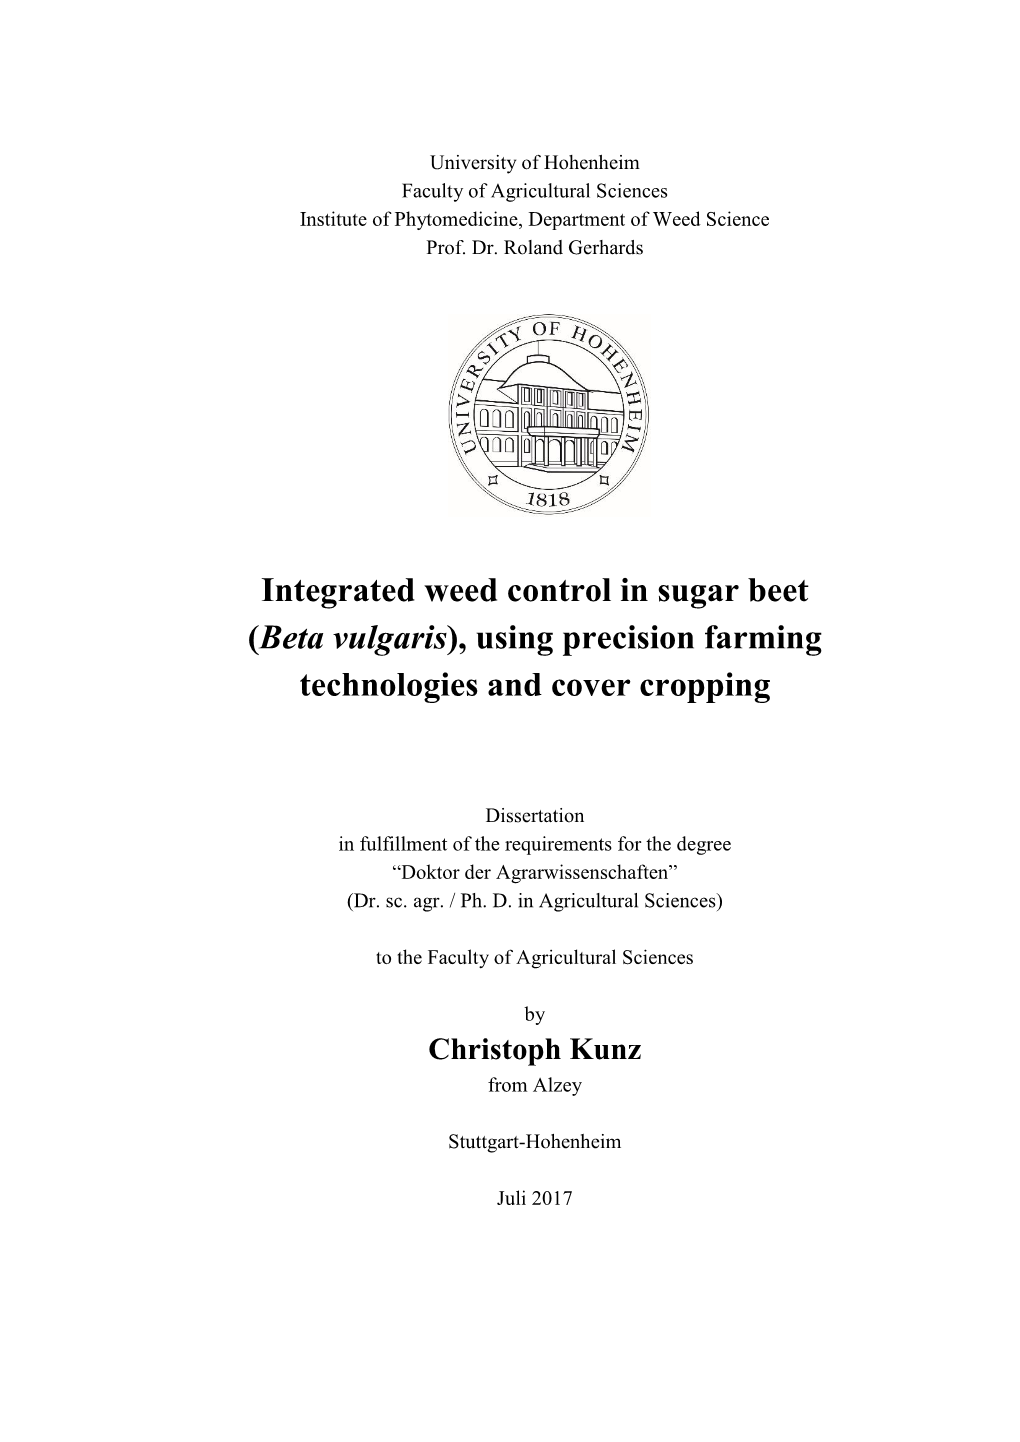 Integrated Weed Control in Sugar Beet (Beta Vulgaris), Using Precision Farming Technologies and Cover Cropping